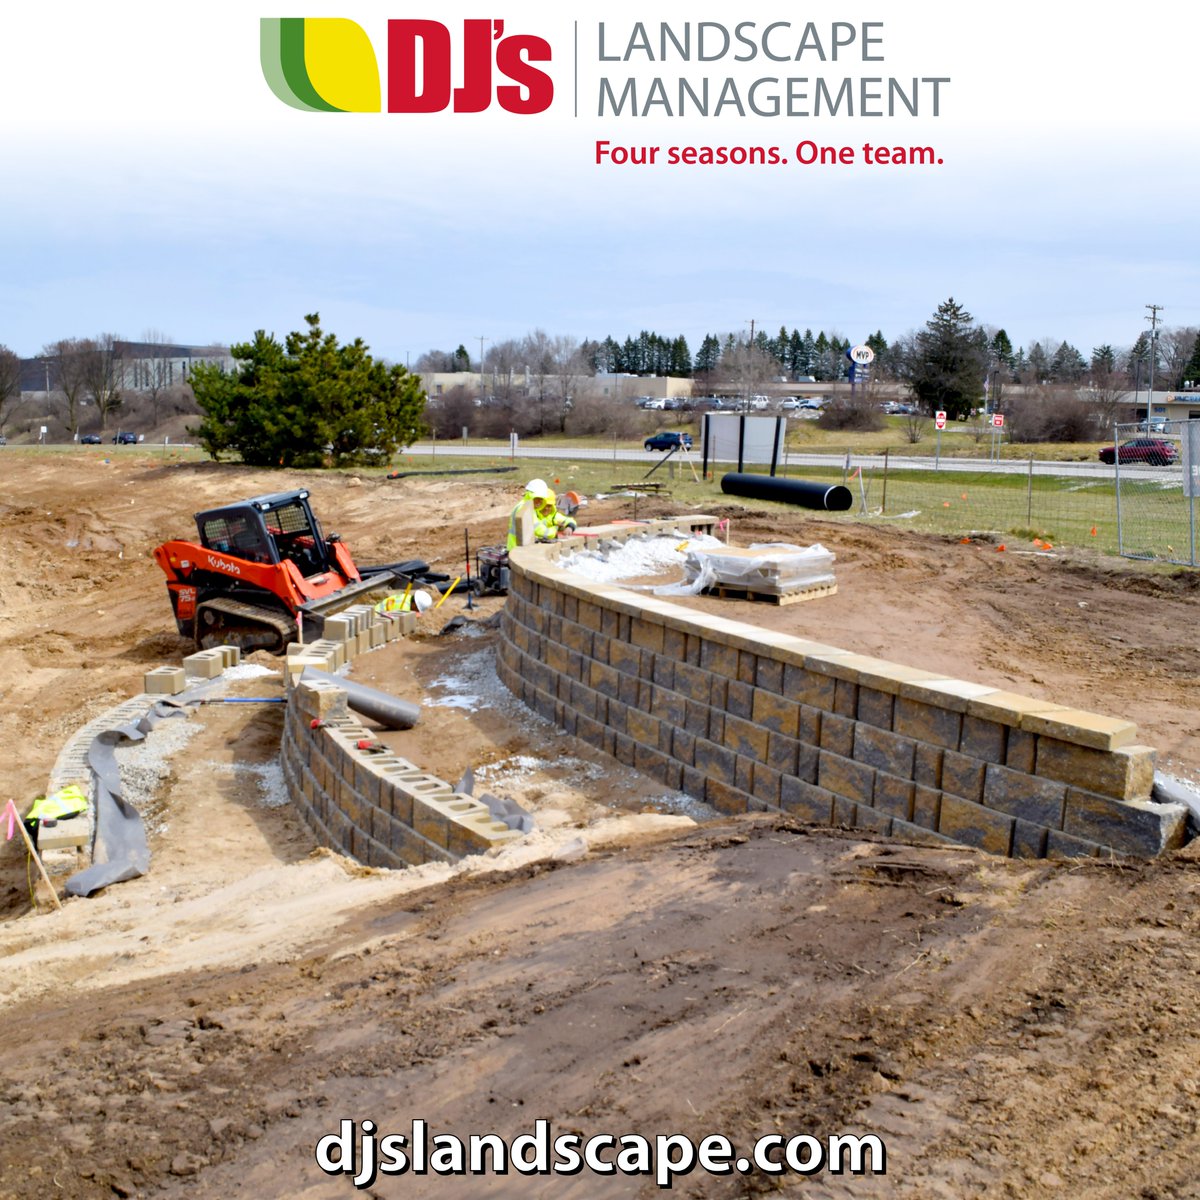 #TeamDJ #GrandRapids putting together a three-tier retaining wall in #Rockford with the usual precision our customers expect and deserve! djslandscape.com
#hardscapelife